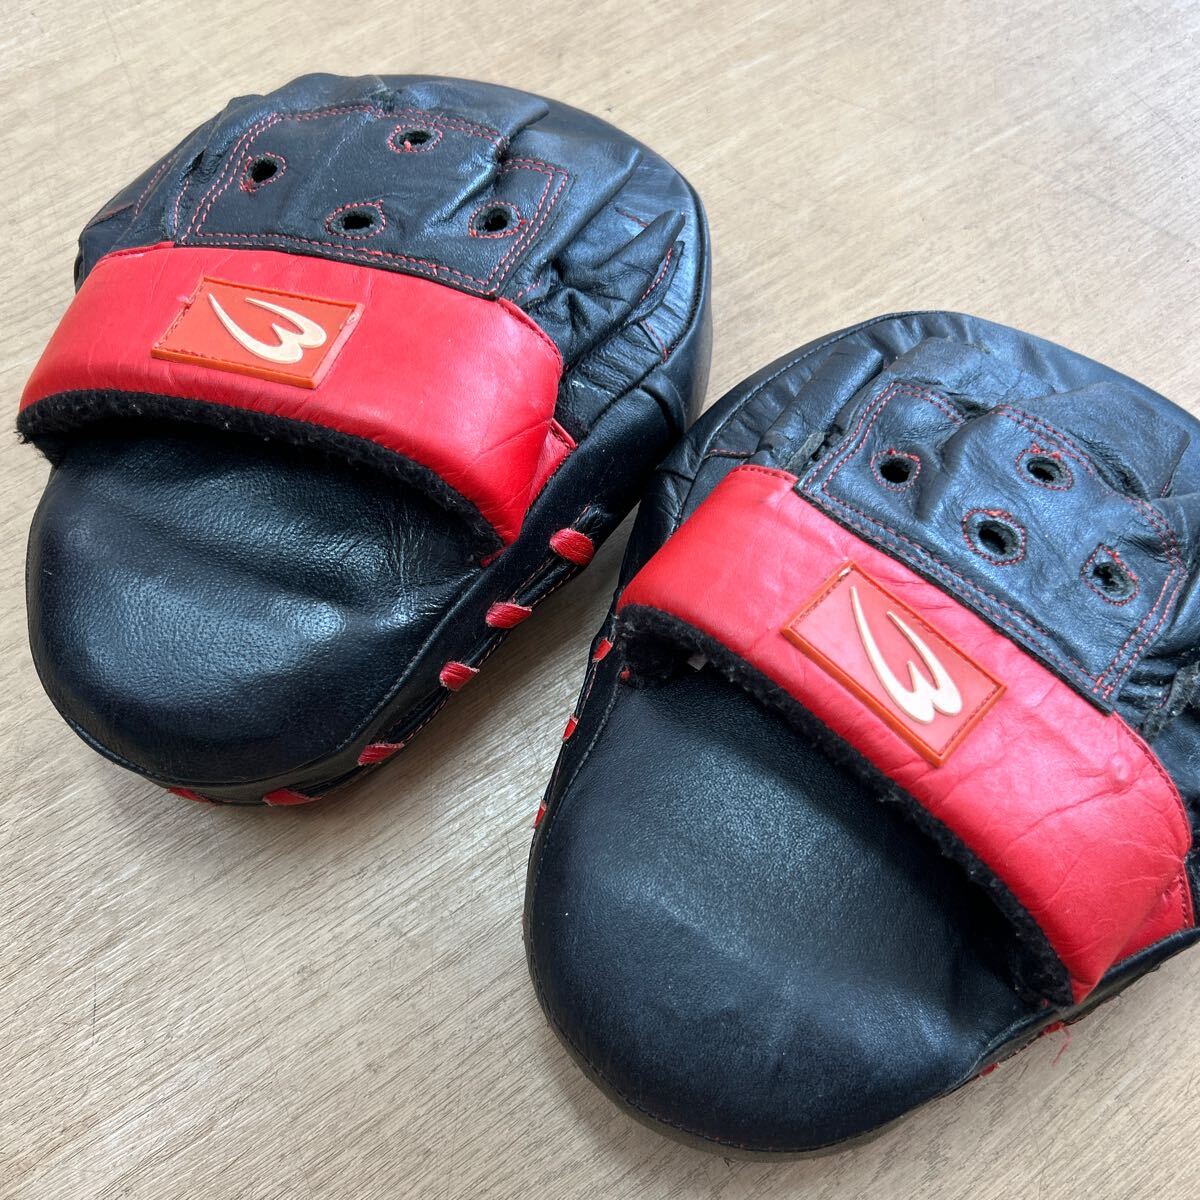 BODYMAKER body Manufacturers punching mitt black × red black red color boxing combative sports karate training exercise 